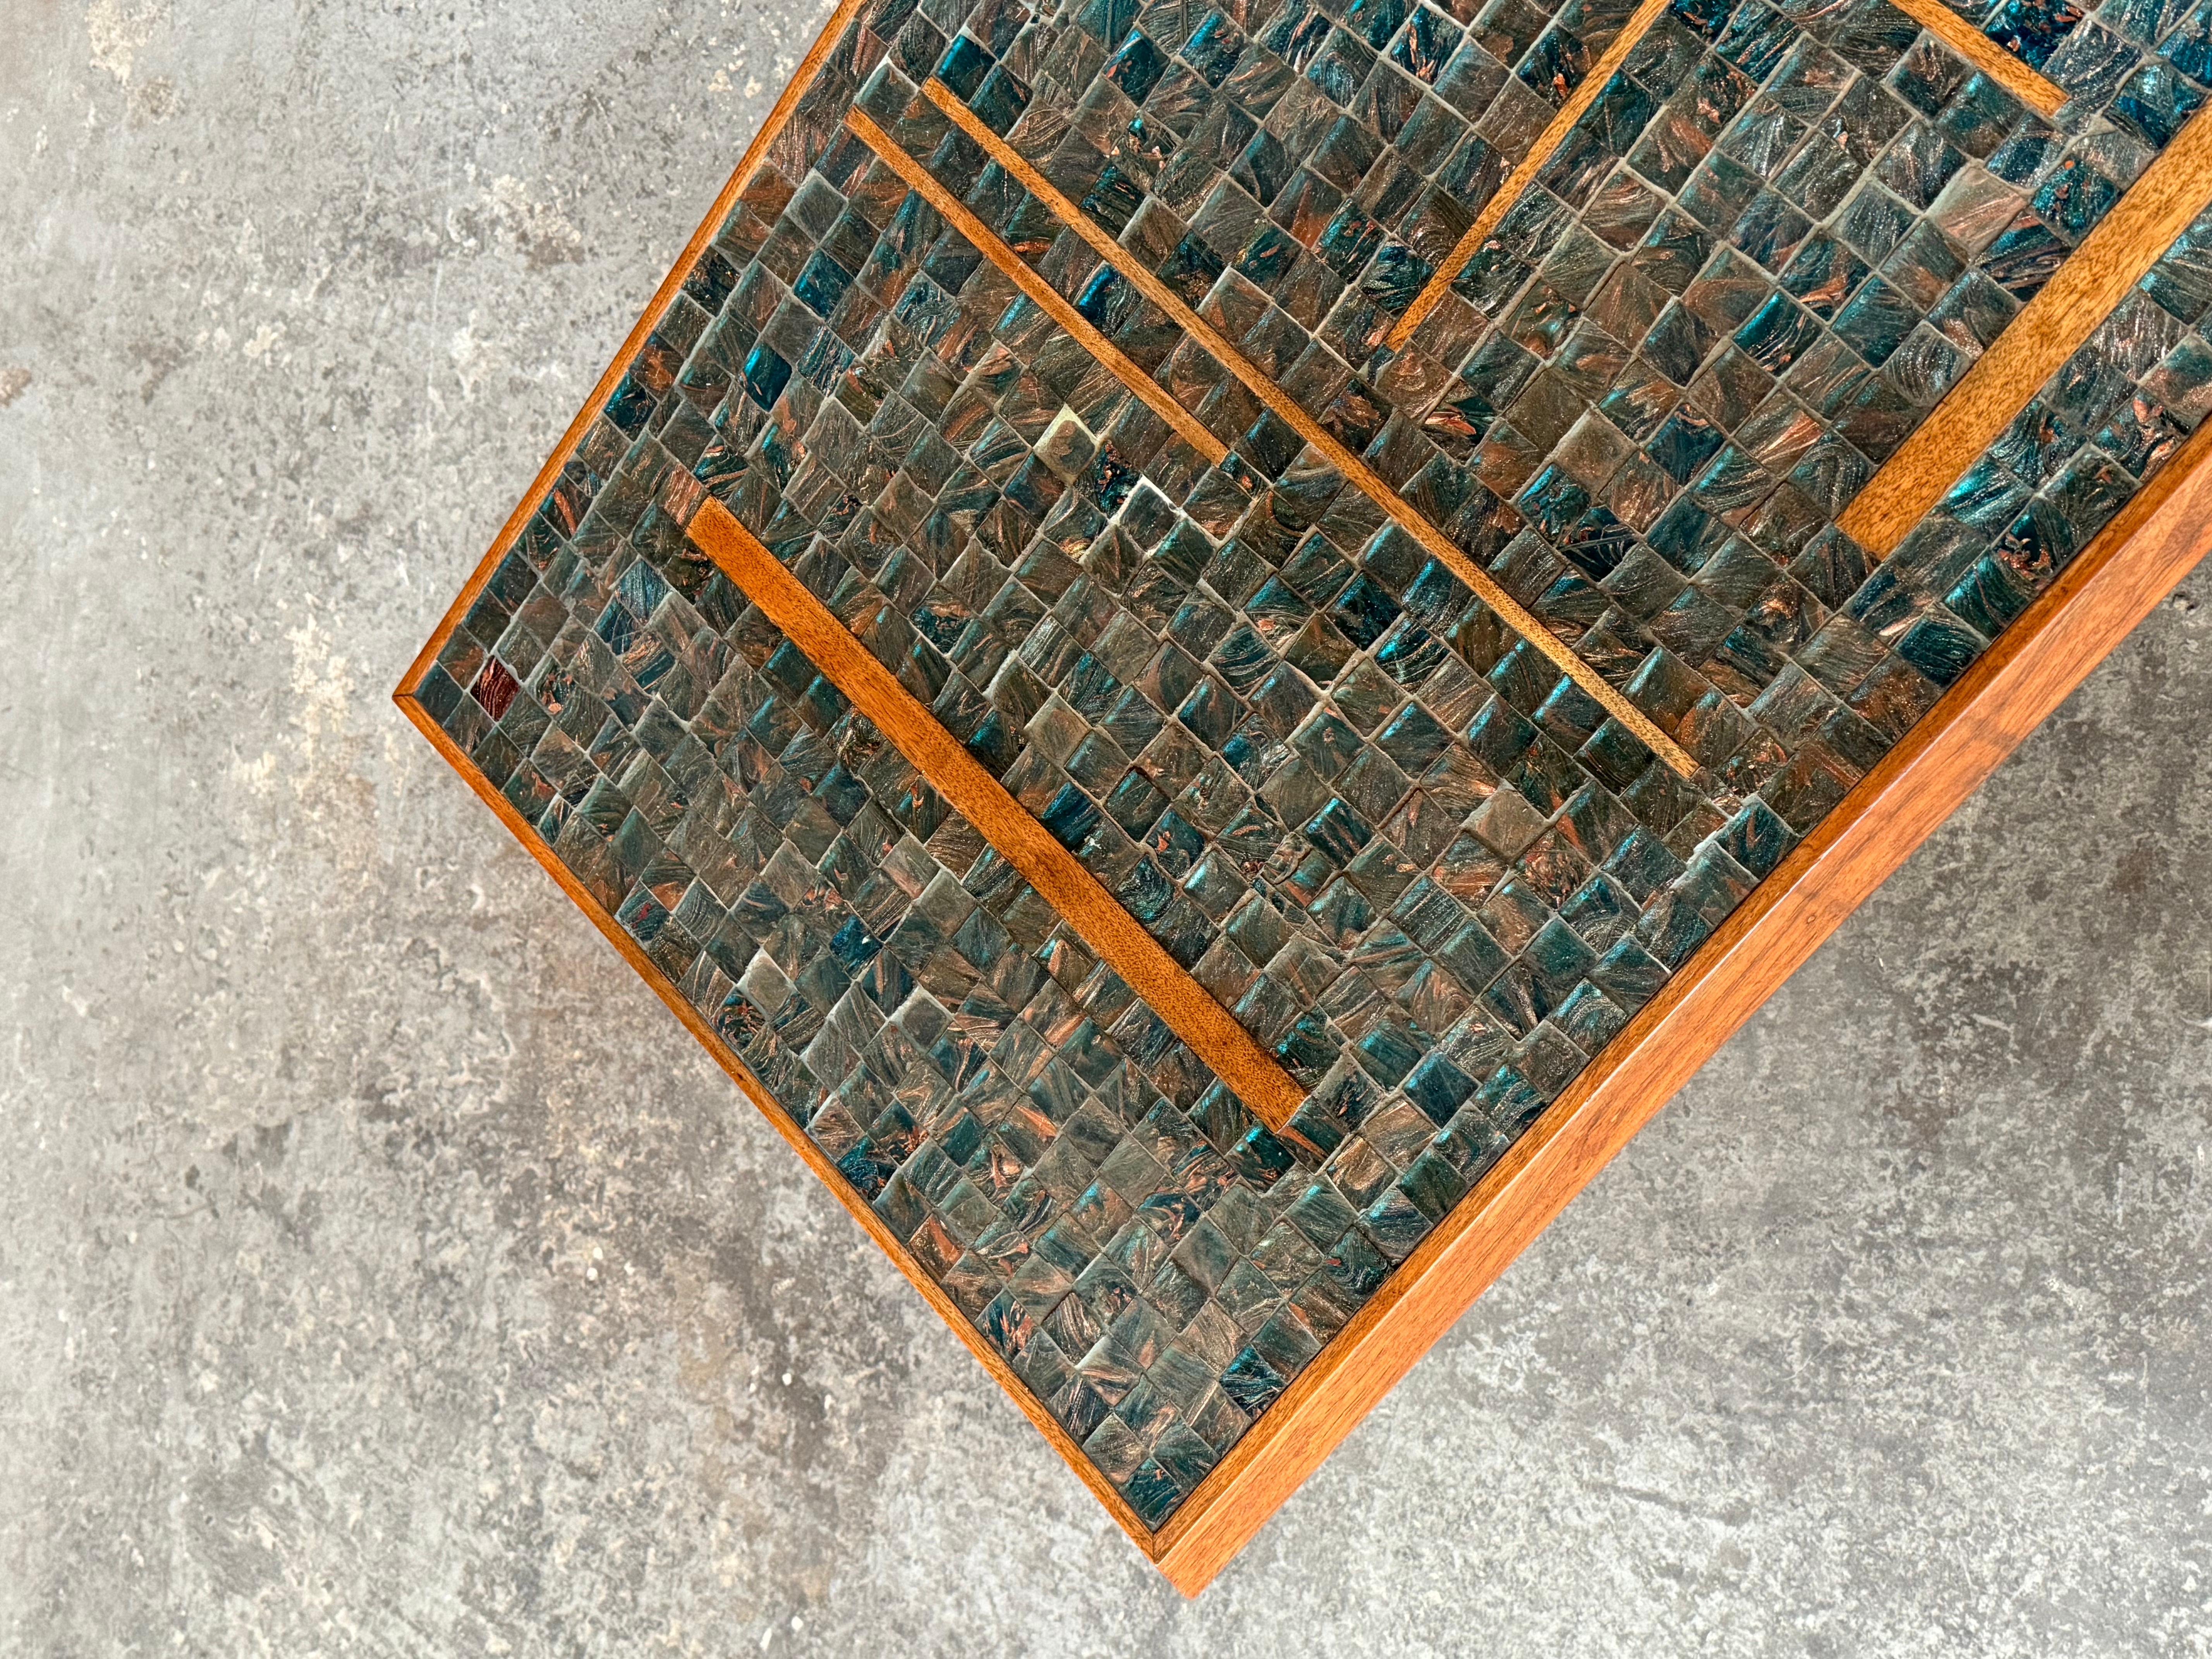 1950s Handmade  Glass Tile Mosaic with Walnut Inlay Coffee Table In Good Condition For Sale In Oakland, CA